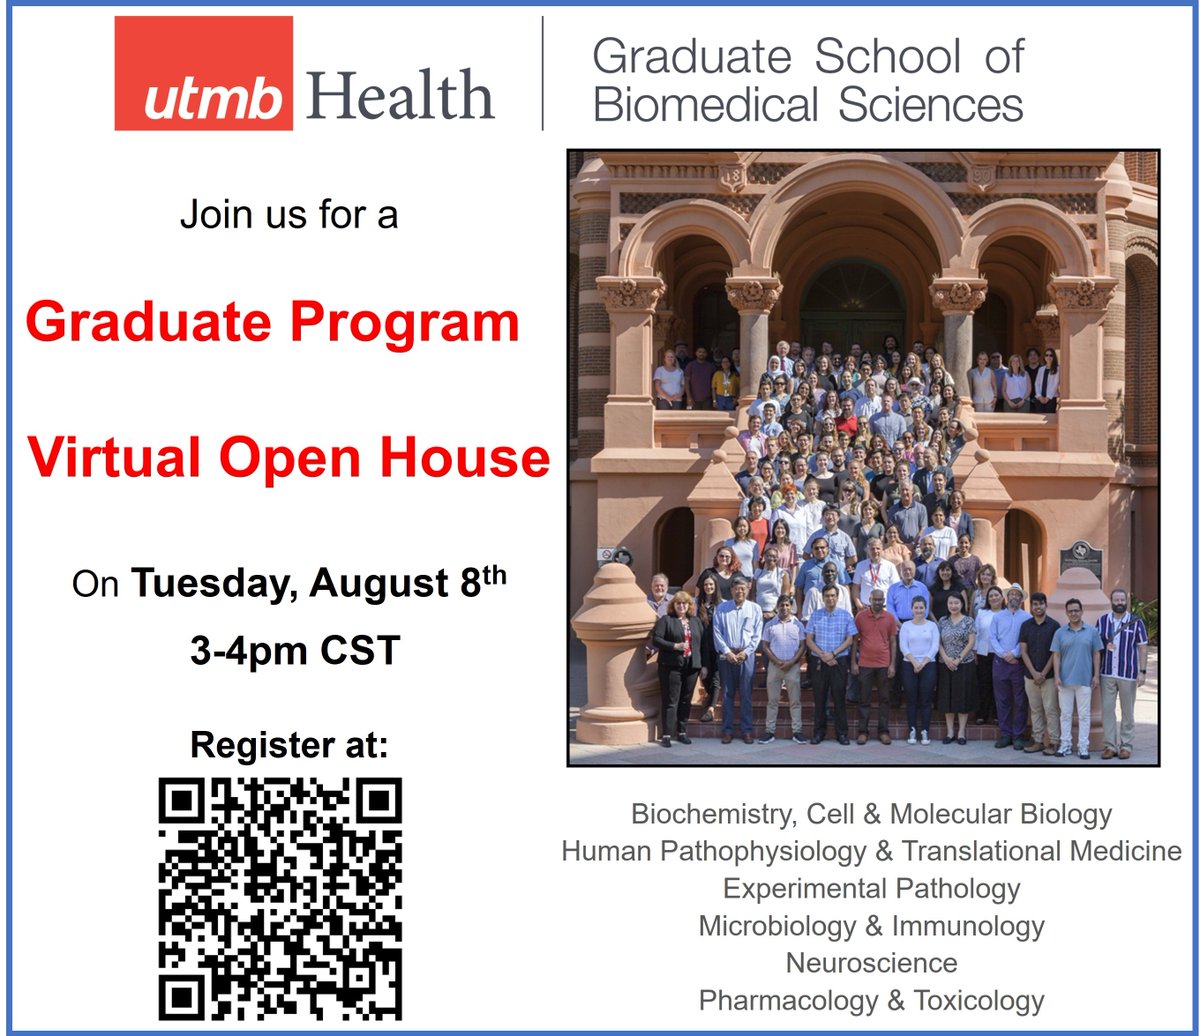 Prospective PhD Students: You can choose up to 3 of our basic biomedical and translational science programs to consider your application for admission! Register and join us on August 8th to learn more about our programs and which ones are best for you. zoom.us/meeting/regist…